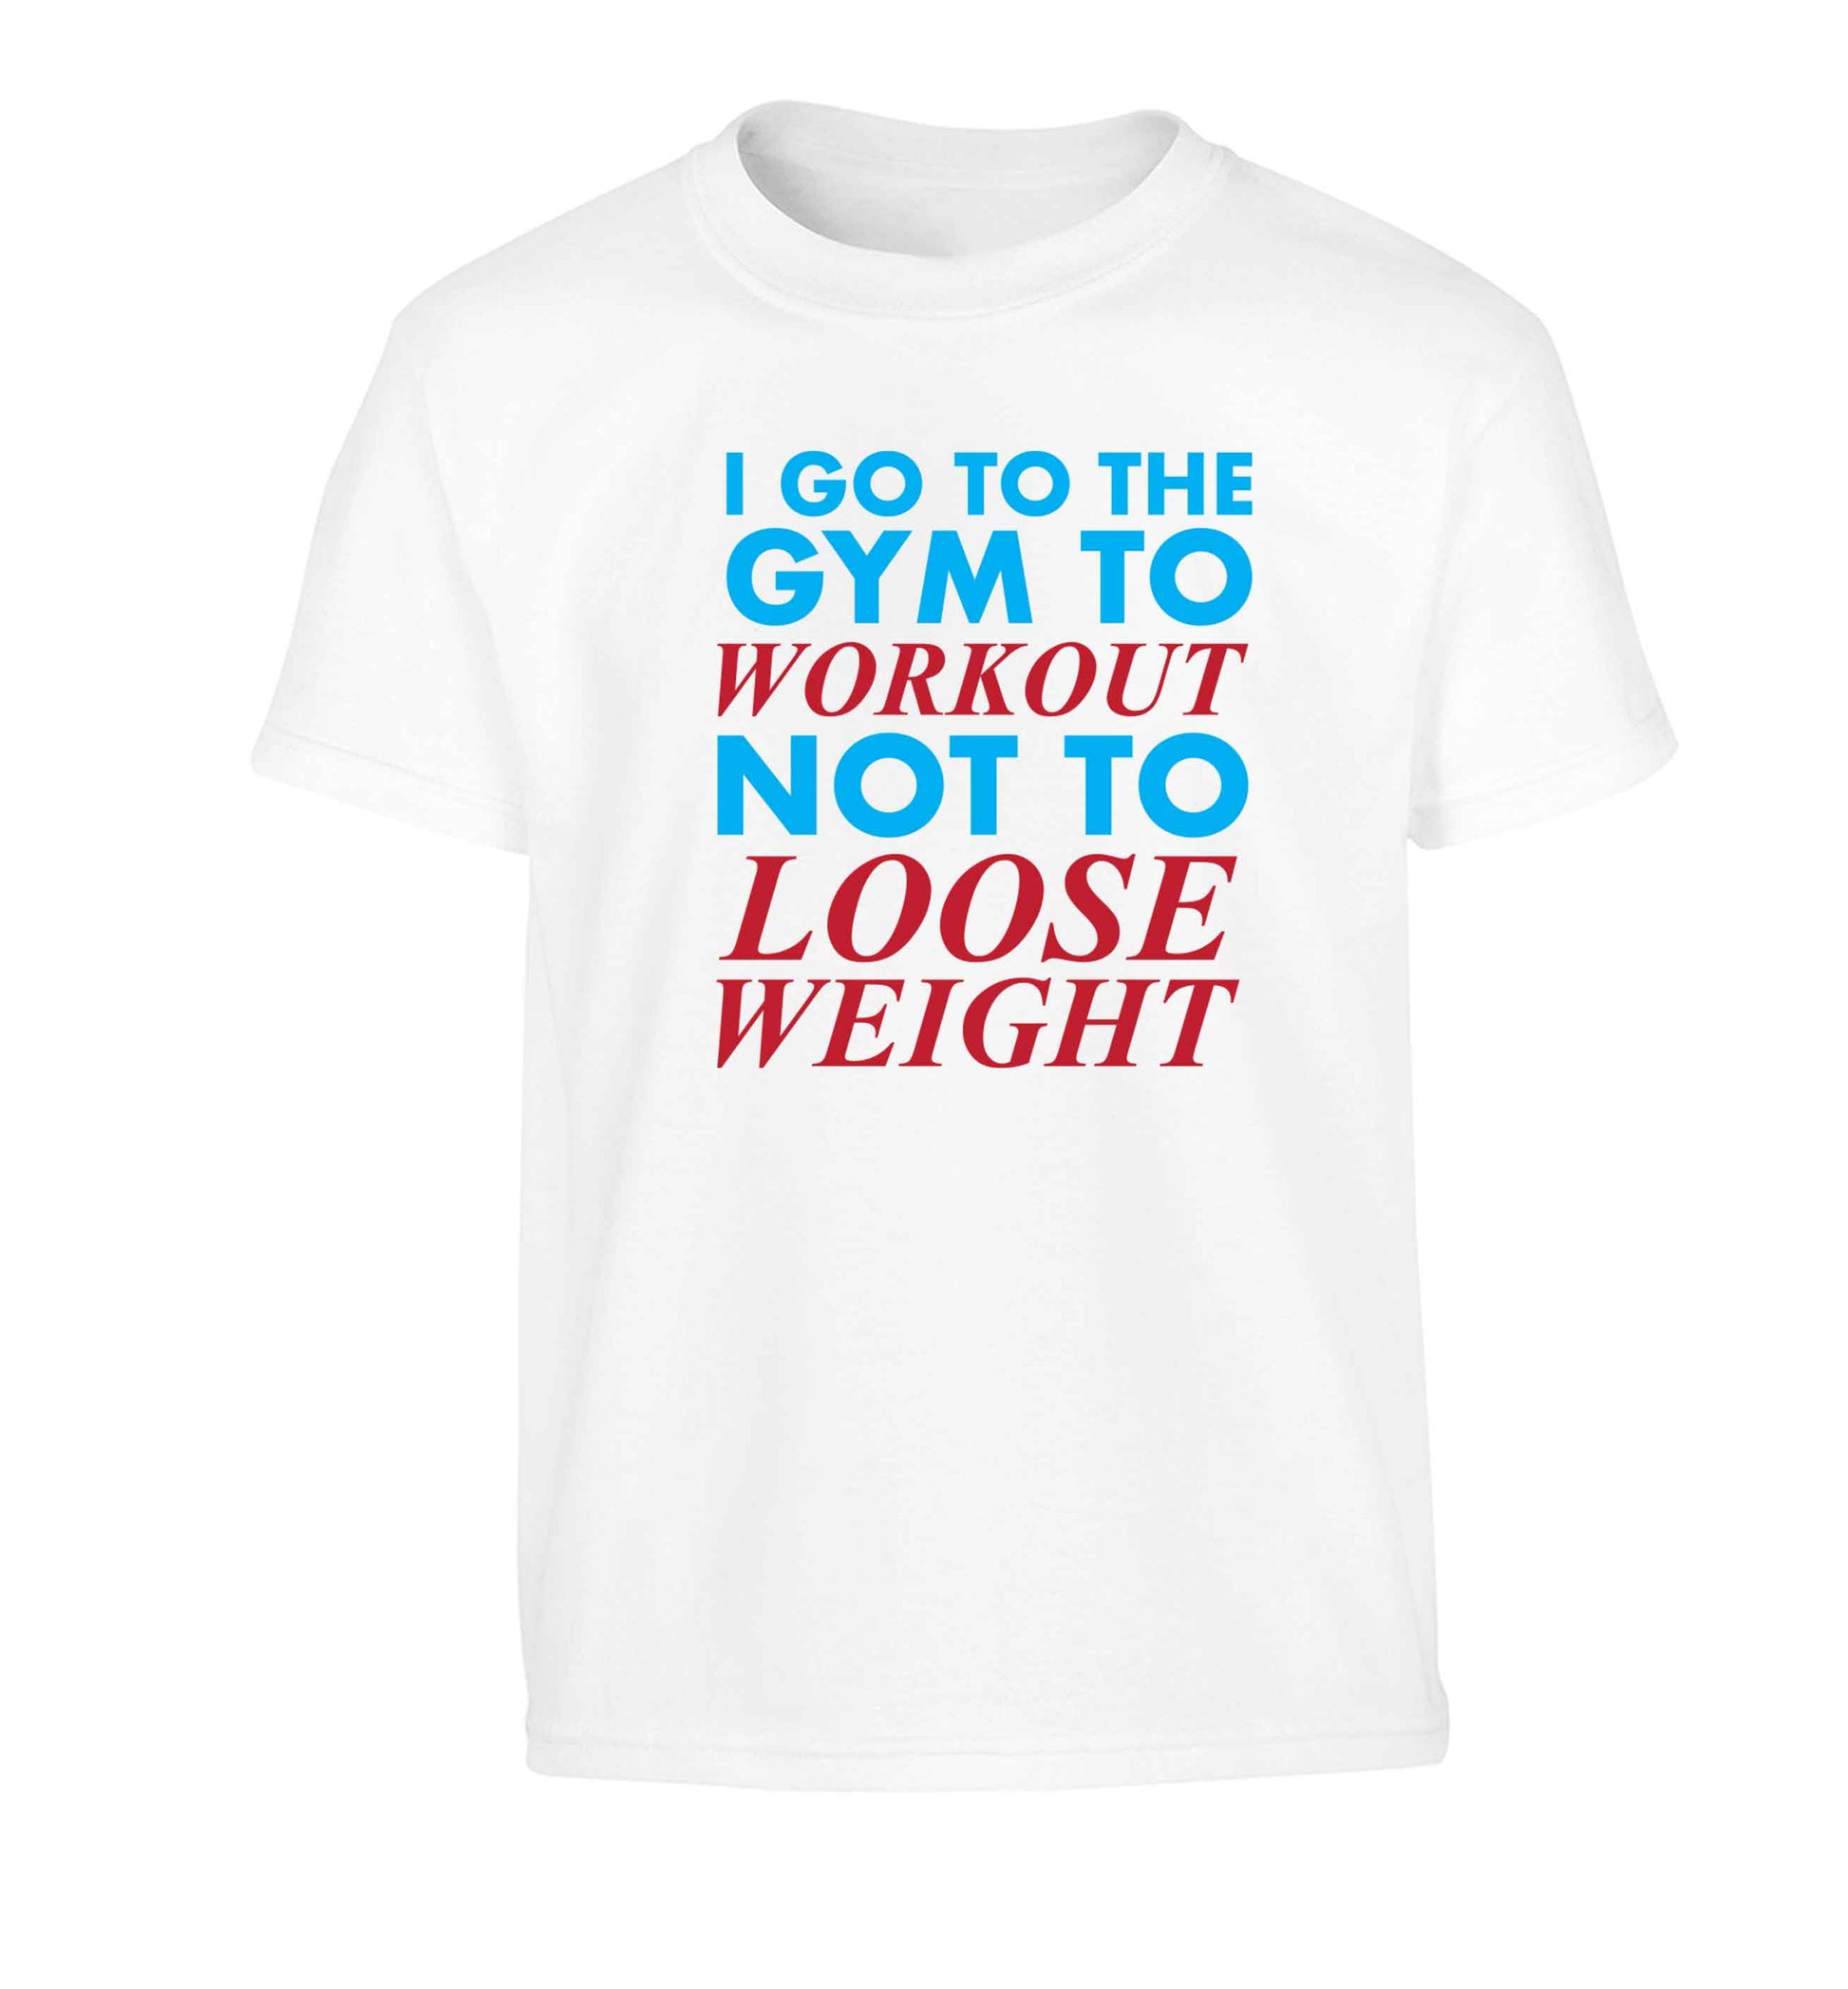 I go to the gym to workout not to loose weight Children's white Tshirt 12-13 Years